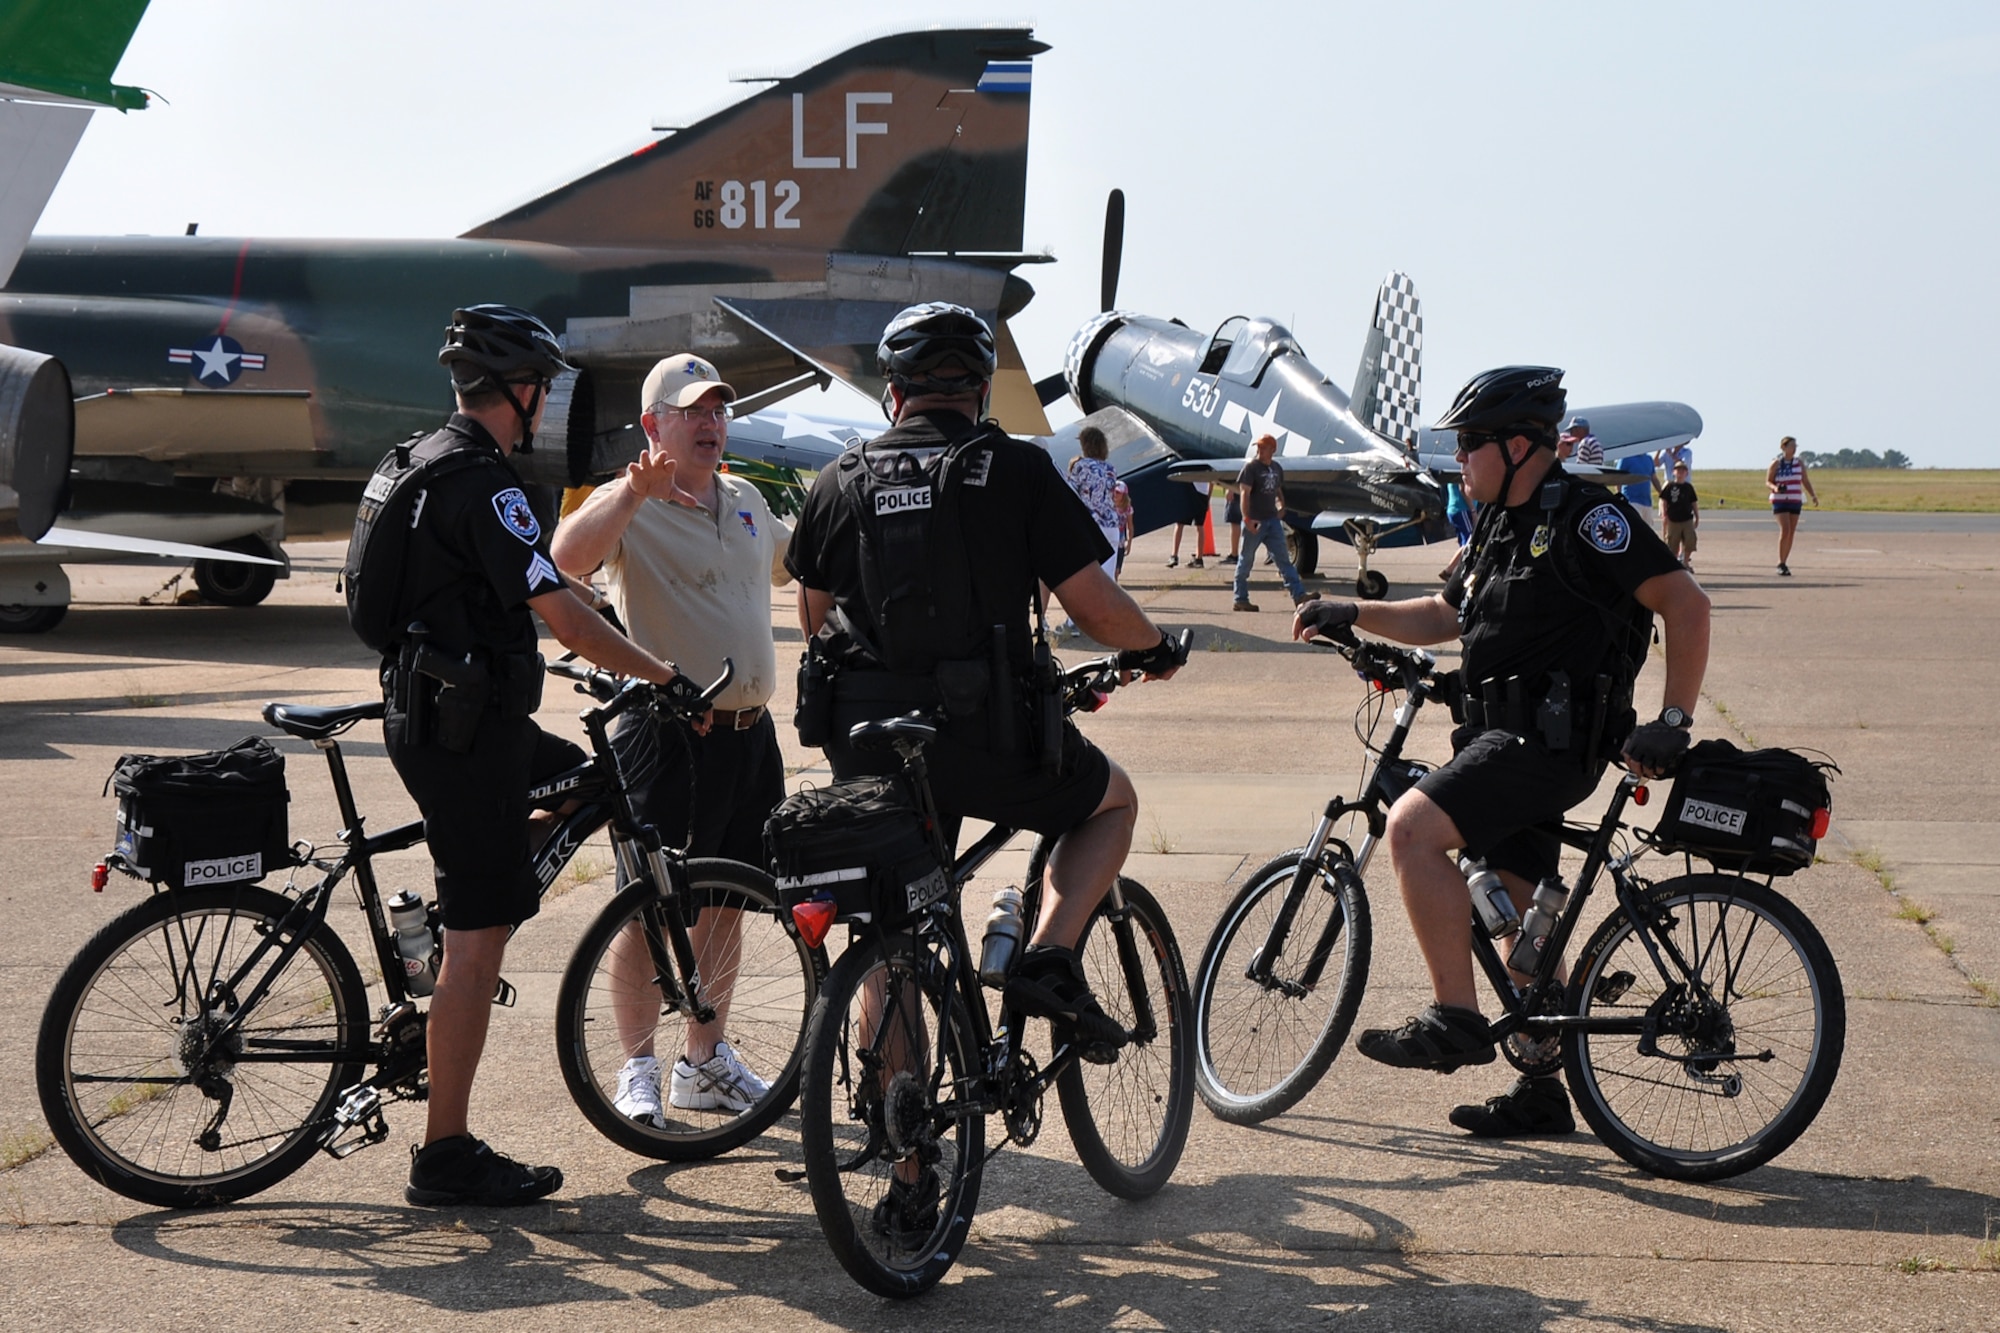 Police Chief Gary M. Swindle, of the City of Tyler, Texas, speaks with several of his uniformed officers before the opening ceremony of the “Wings Over Tyler Air Show” at the Tyler Pounds Regional Airport, July 3, 2011. A number of Tyler and Smith County law enforcement officers stood watch over air show spectators, the perimeter and aircraft at the air show. (U.S. Air Force photo/Tech. Sgt. Jeff Walston)